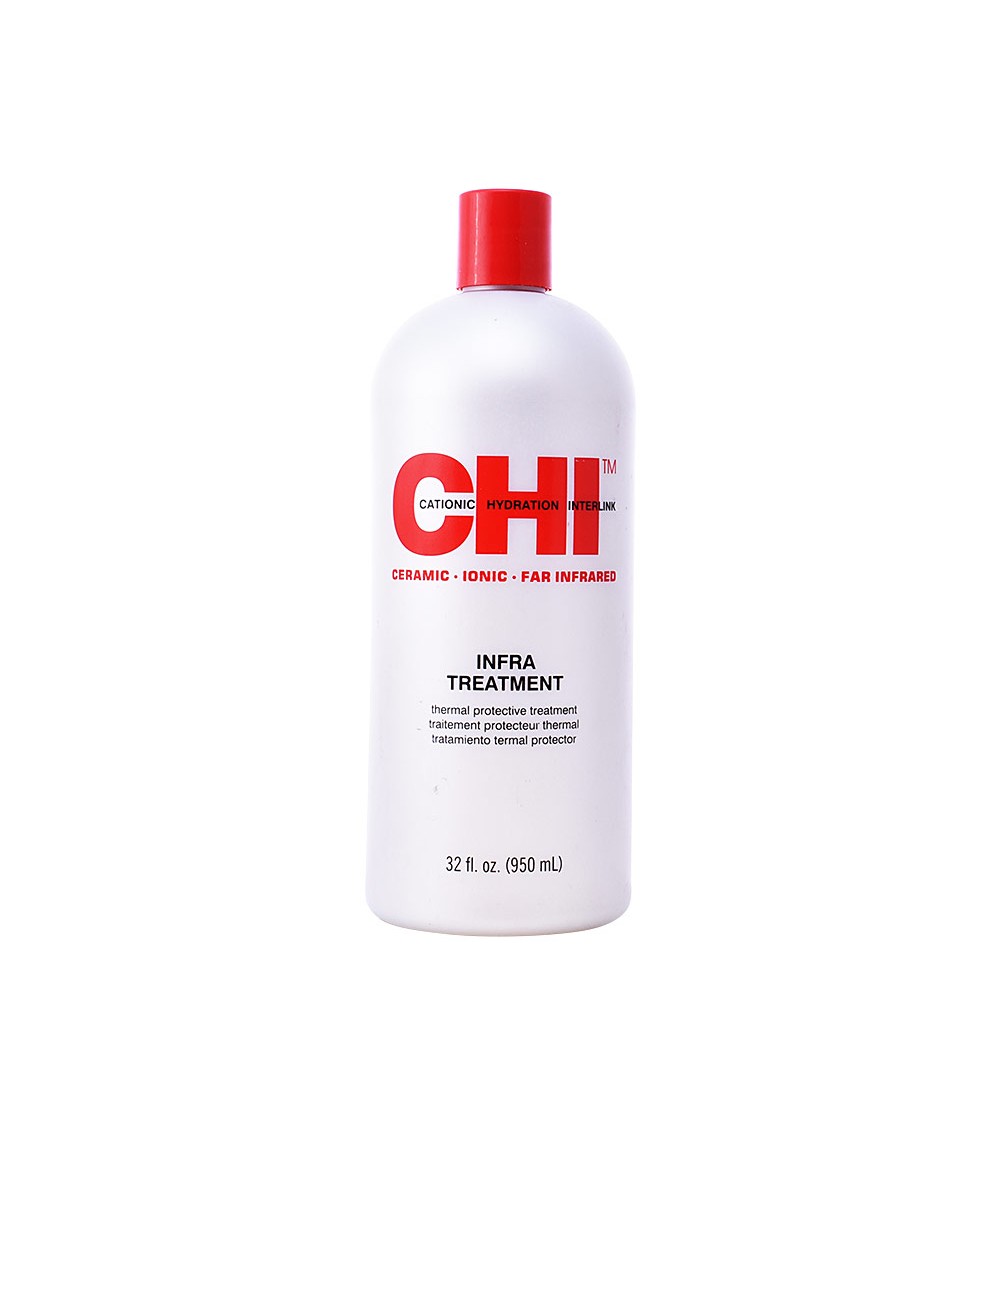 CHI INFRA treatment thermal protective